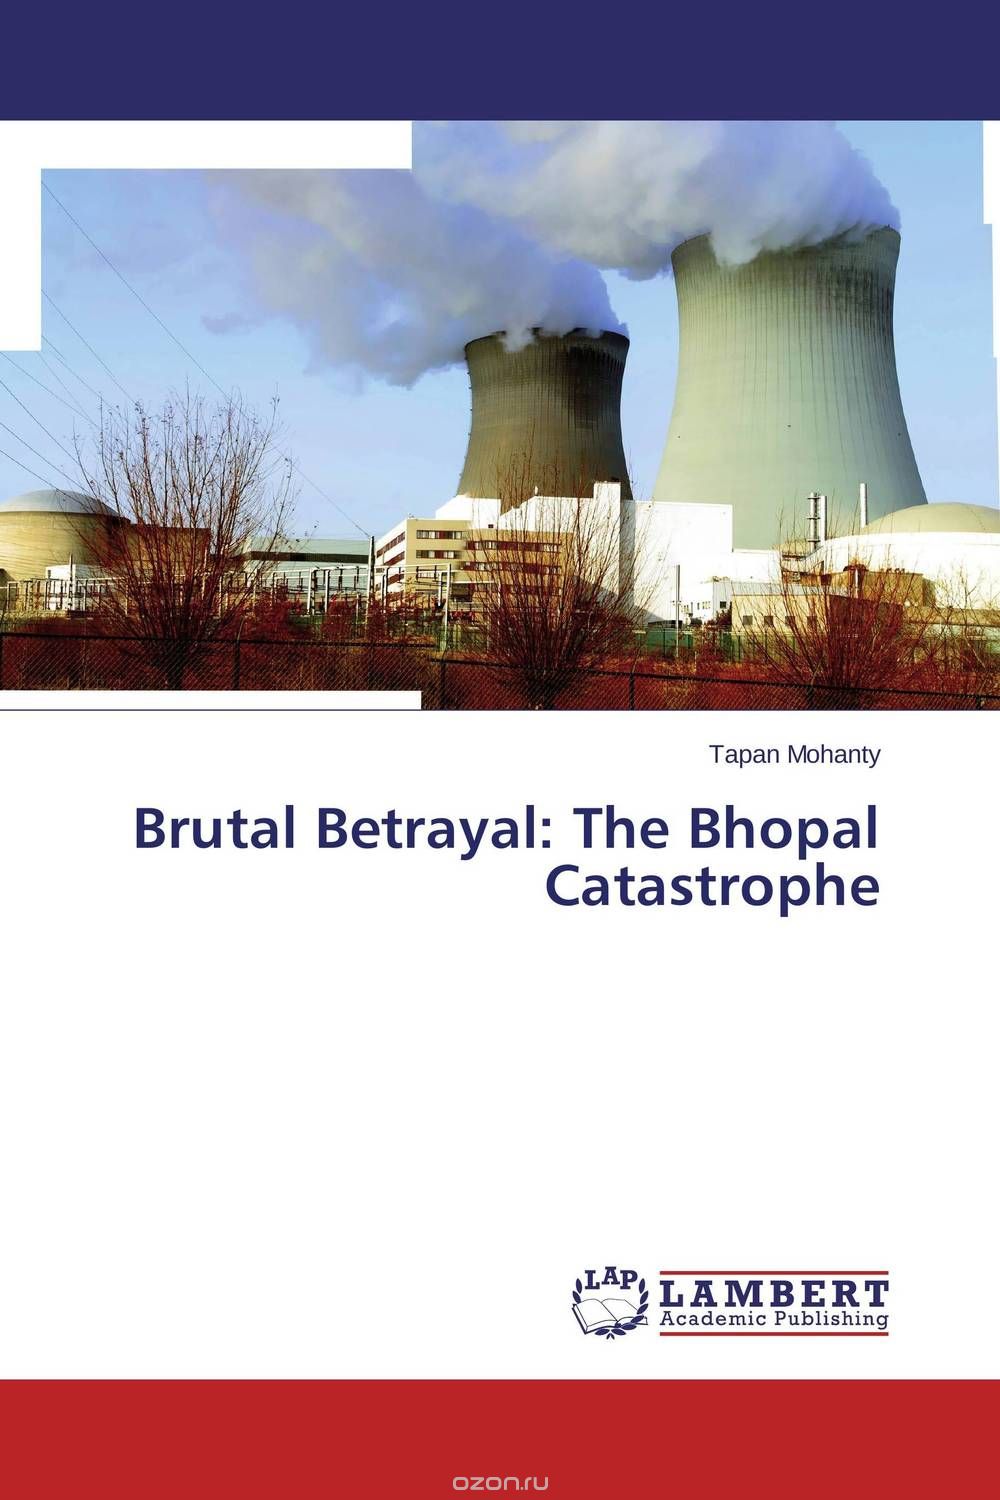 Brutal Betrayal: The Bhopal Catastrophe